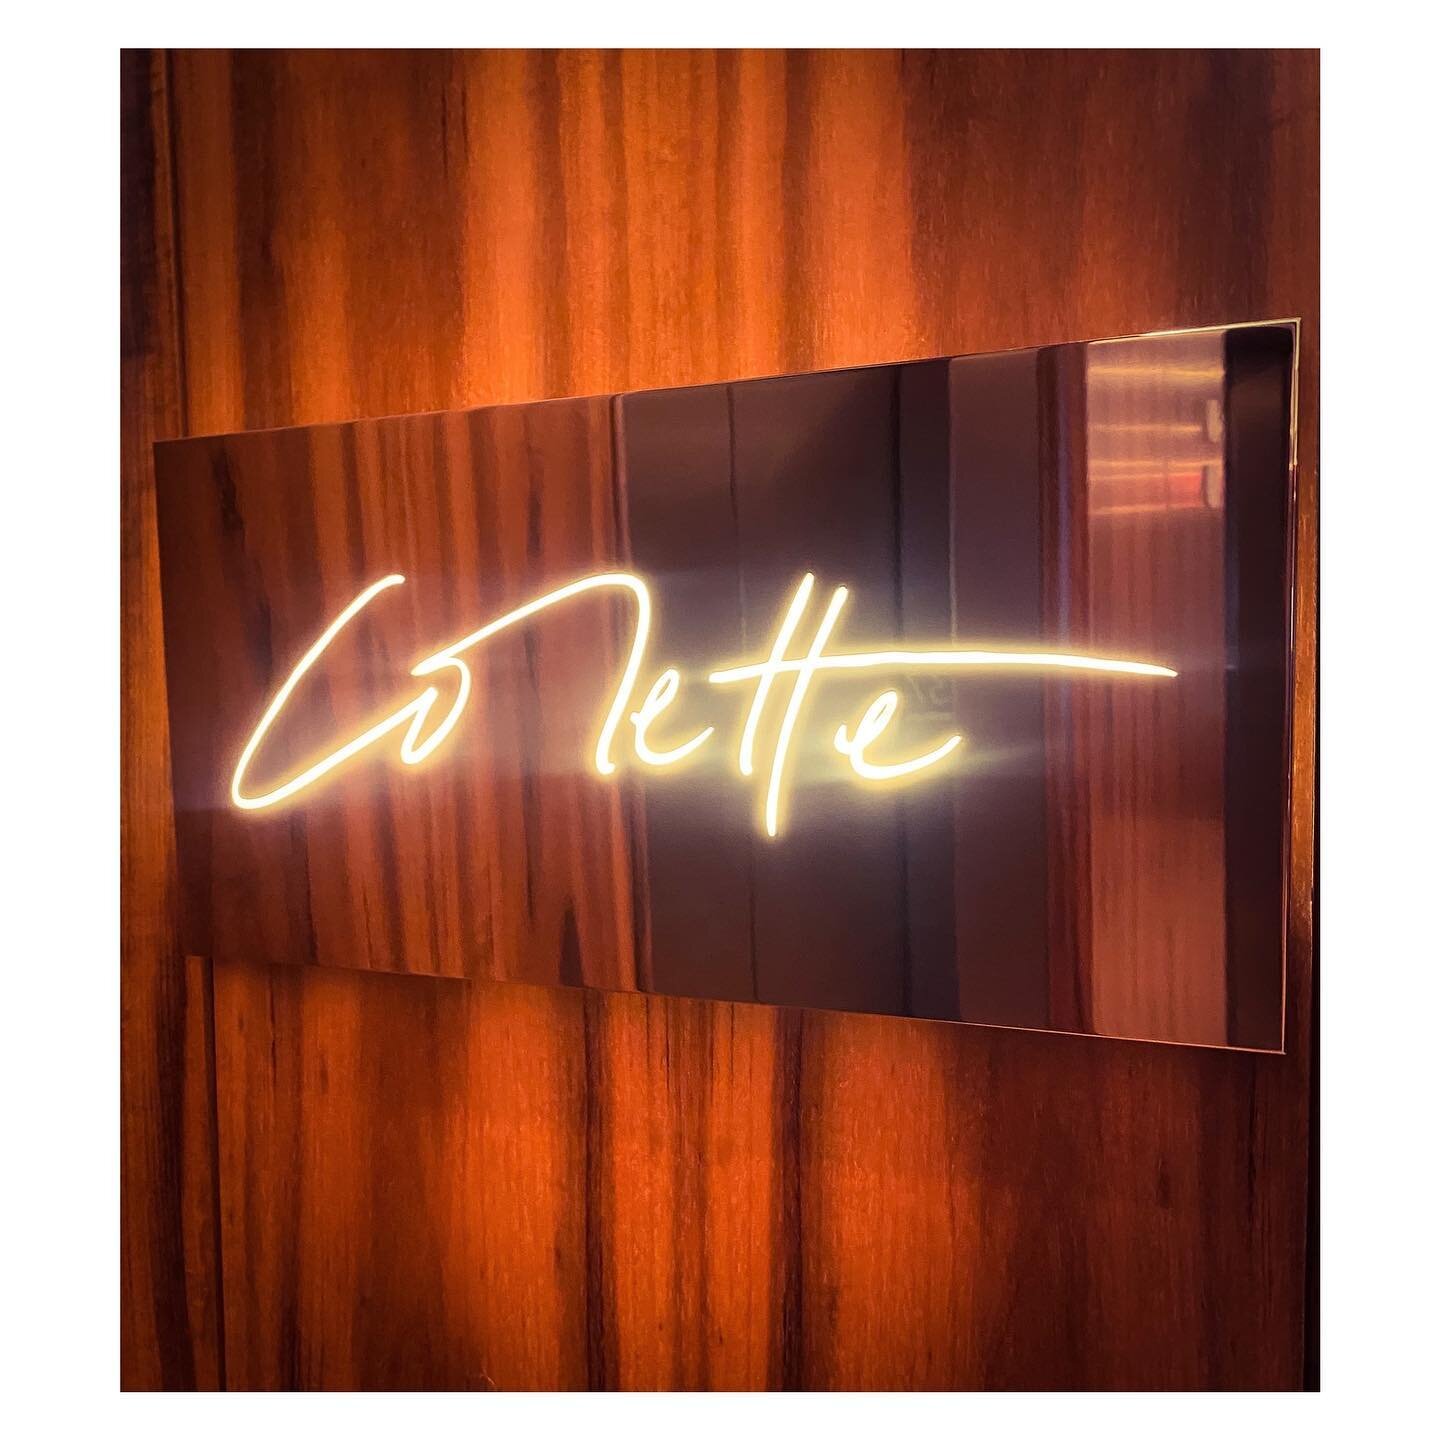 🧡 soon&hellip;Colette NYC
Purchasing by Stovelight 
#hospitalitydesign #luxury #nyc